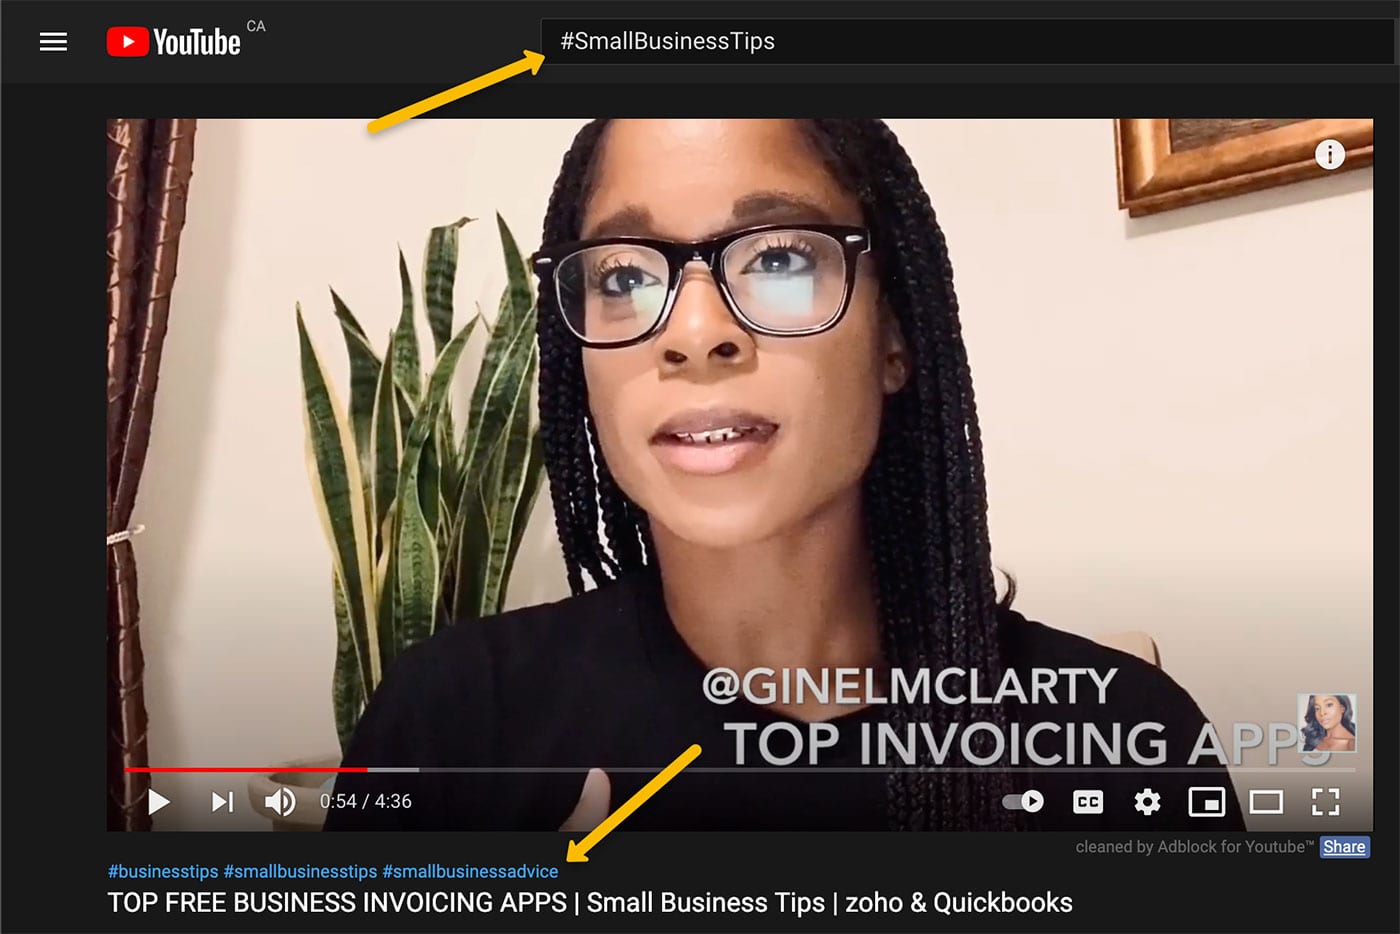 screenshot of a YouTube video found under #SmallBusinessTips, showing the three hashtags under the video title